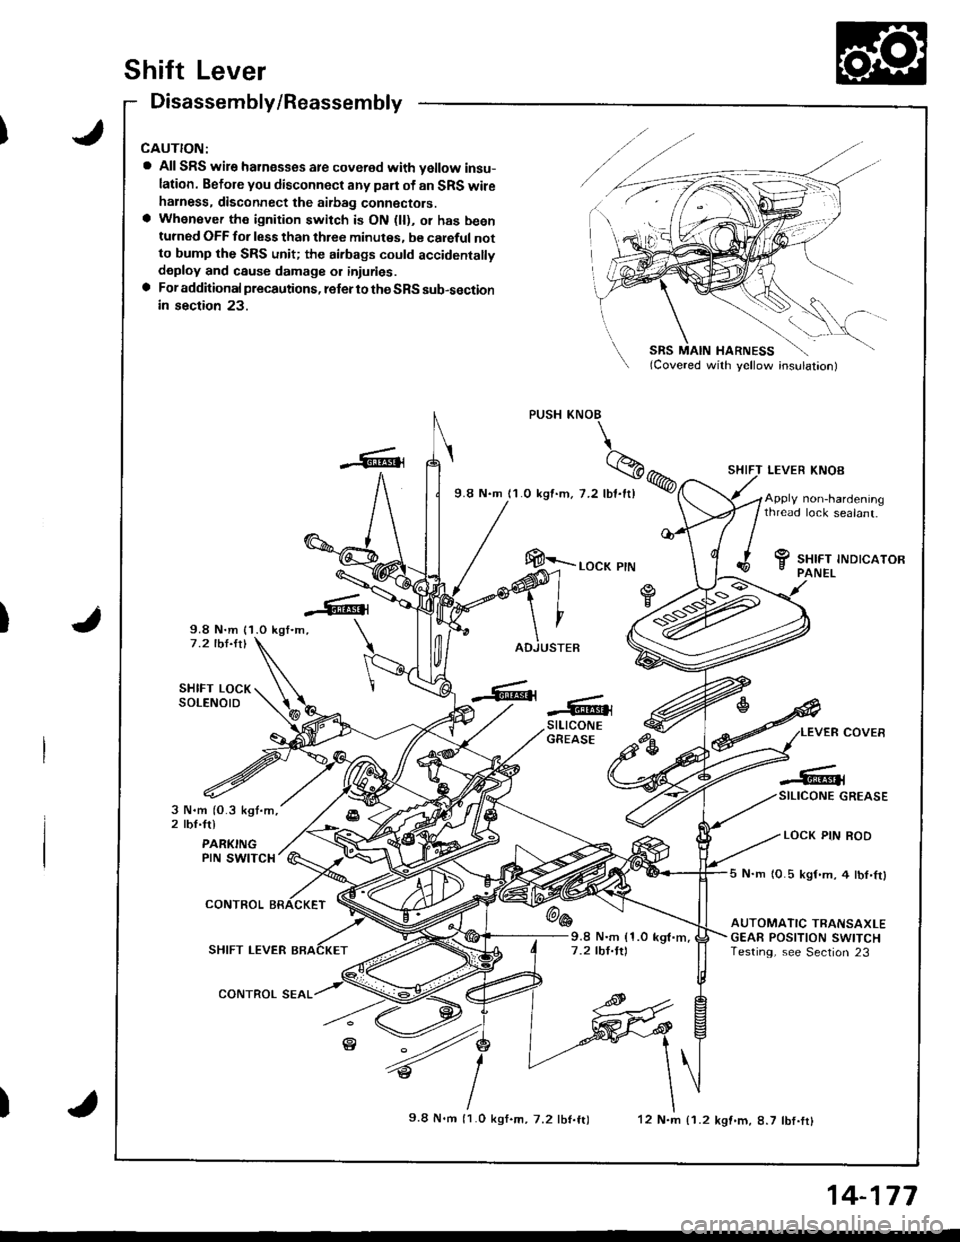 HONDA INTEGRA 1998 4.G Workshop Manual Shift Lever
Disassembly/Reassembly
a All SRS wire harnesses are covered with vellow insu-
lation. Befole you disconnect any part ol an SRS wileharness. disconnect the aitbag connectors.a Whensver the 